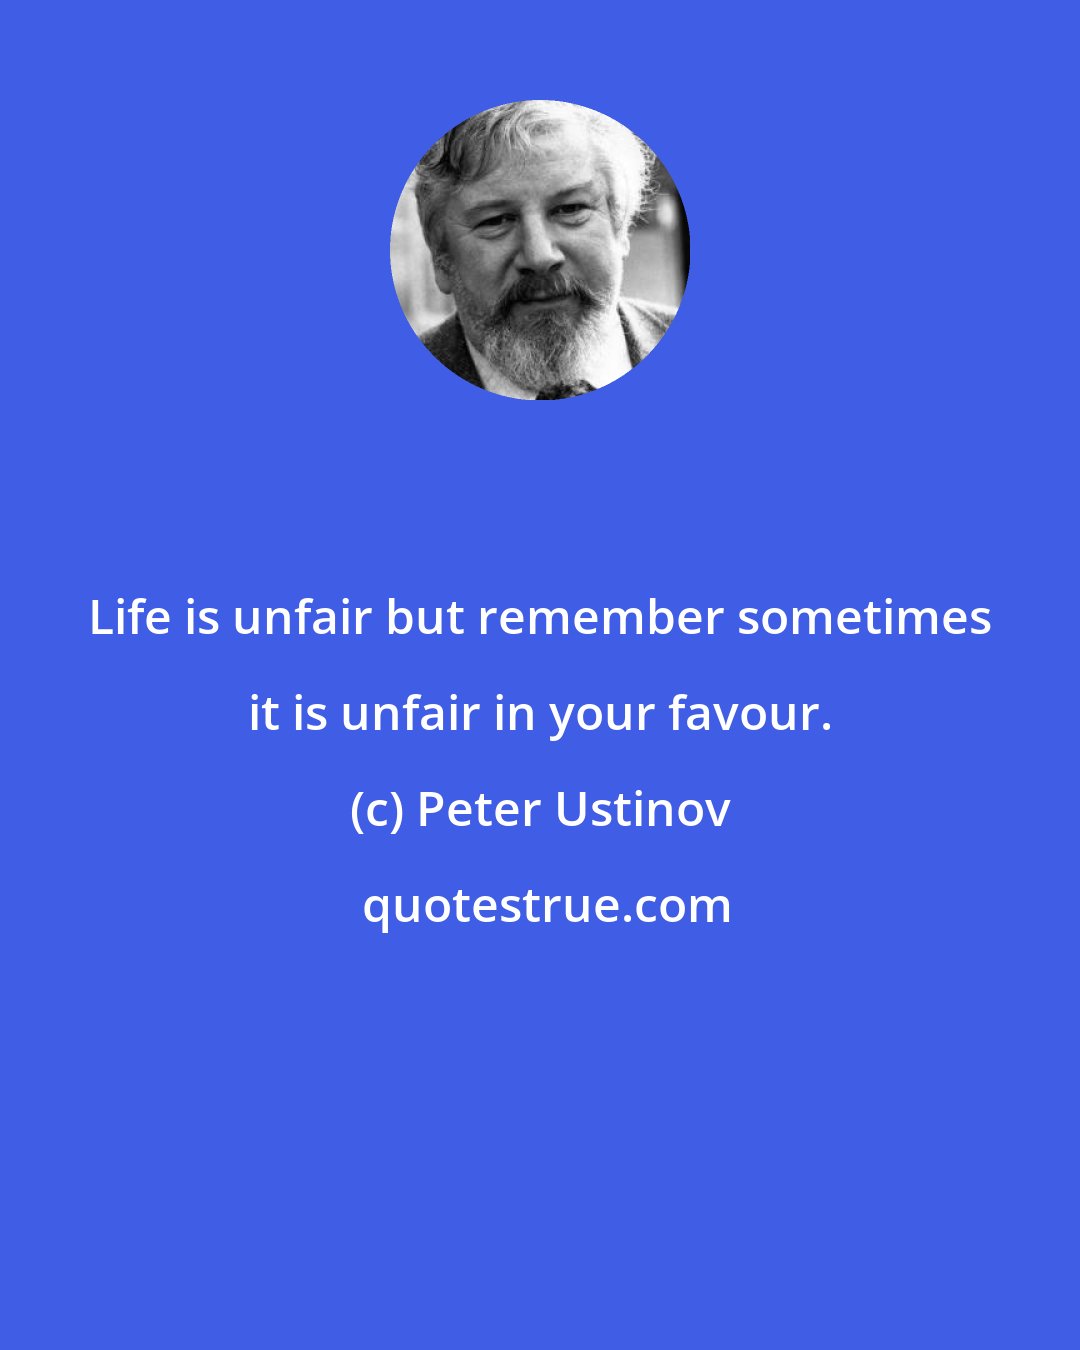 Peter Ustinov: Life is unfair but remember sometimes it is unfair in your favour.